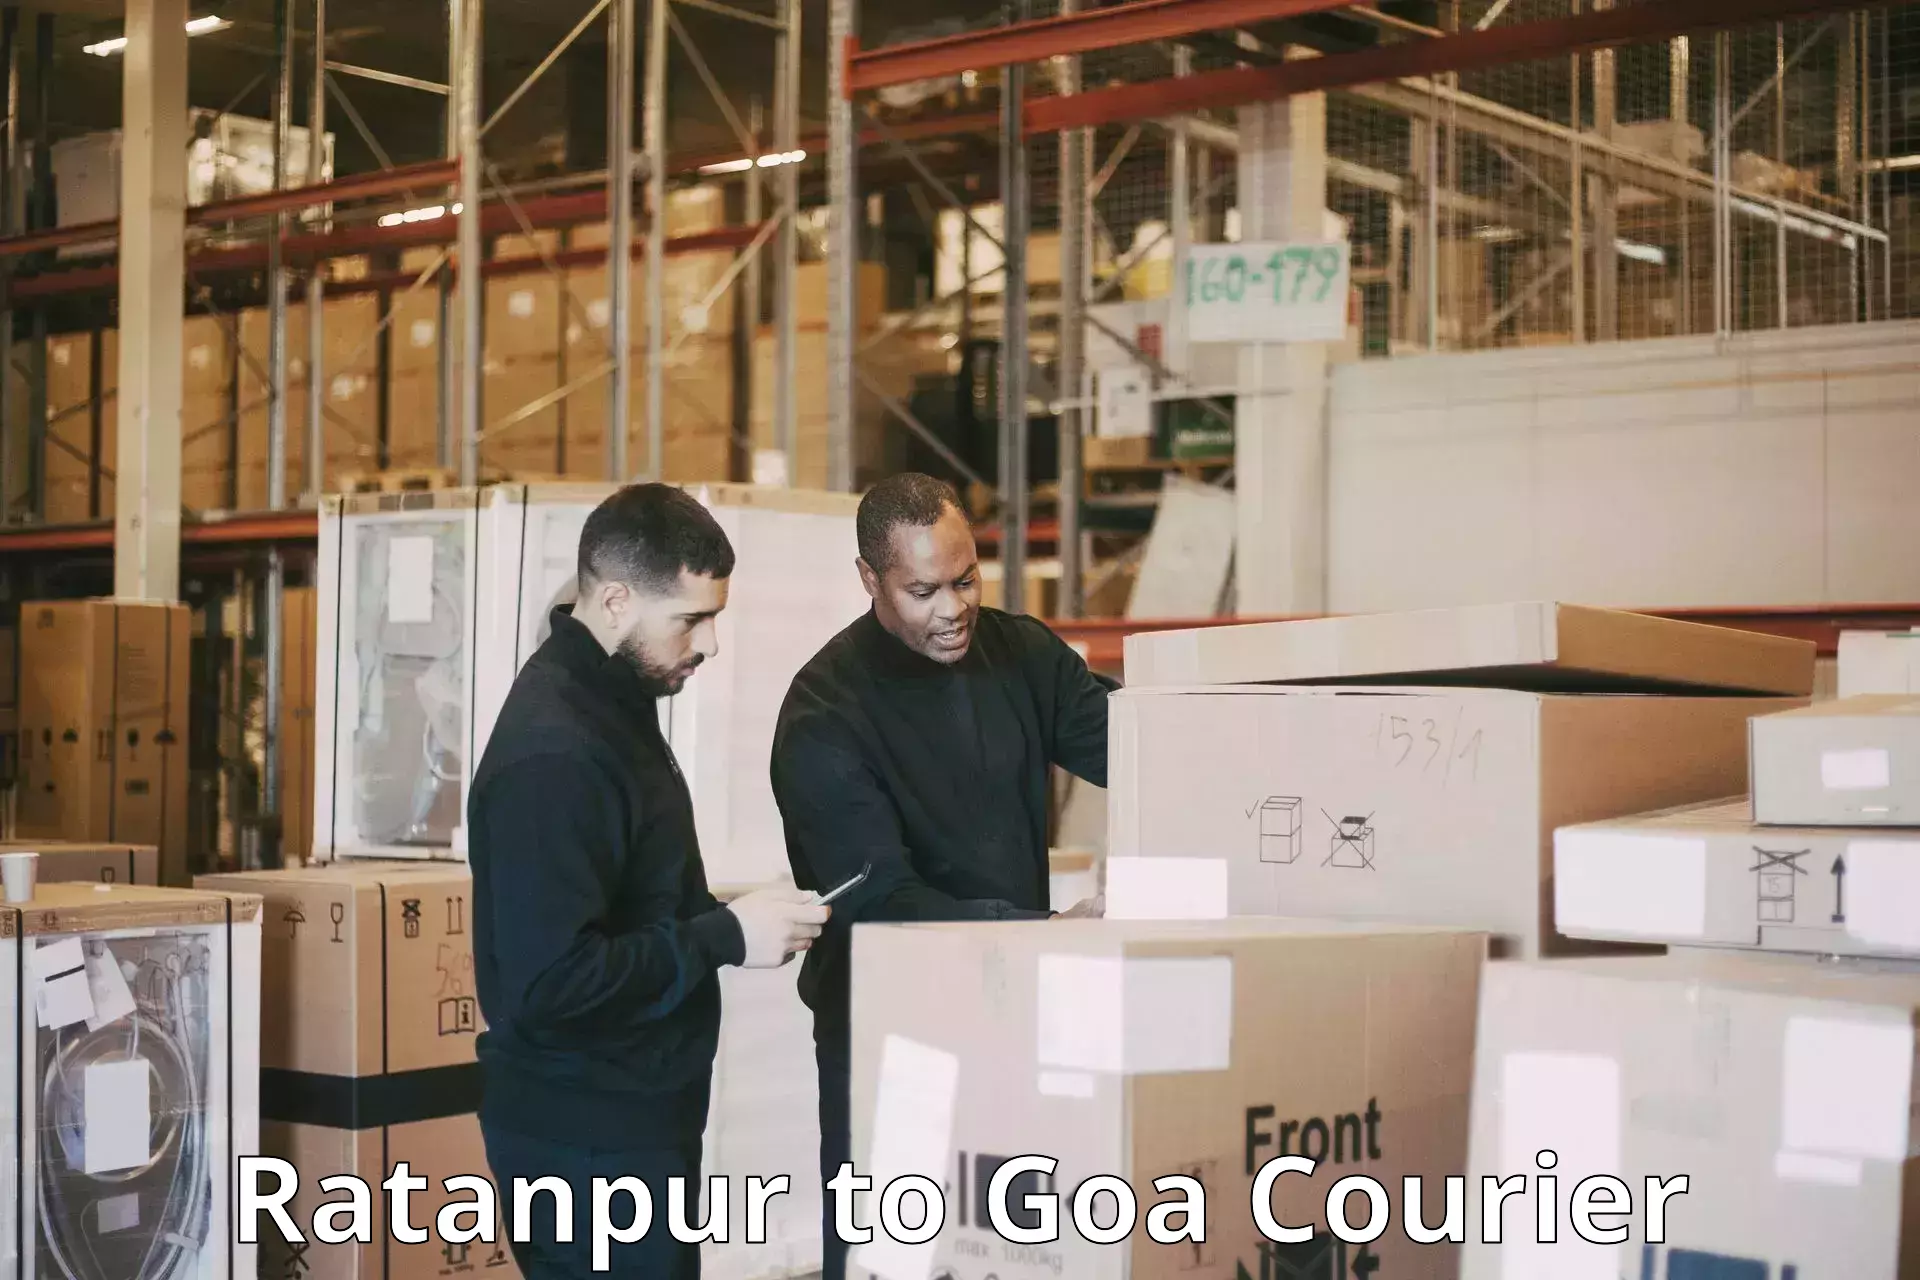 Courier service innovation Ratanpur to Goa University